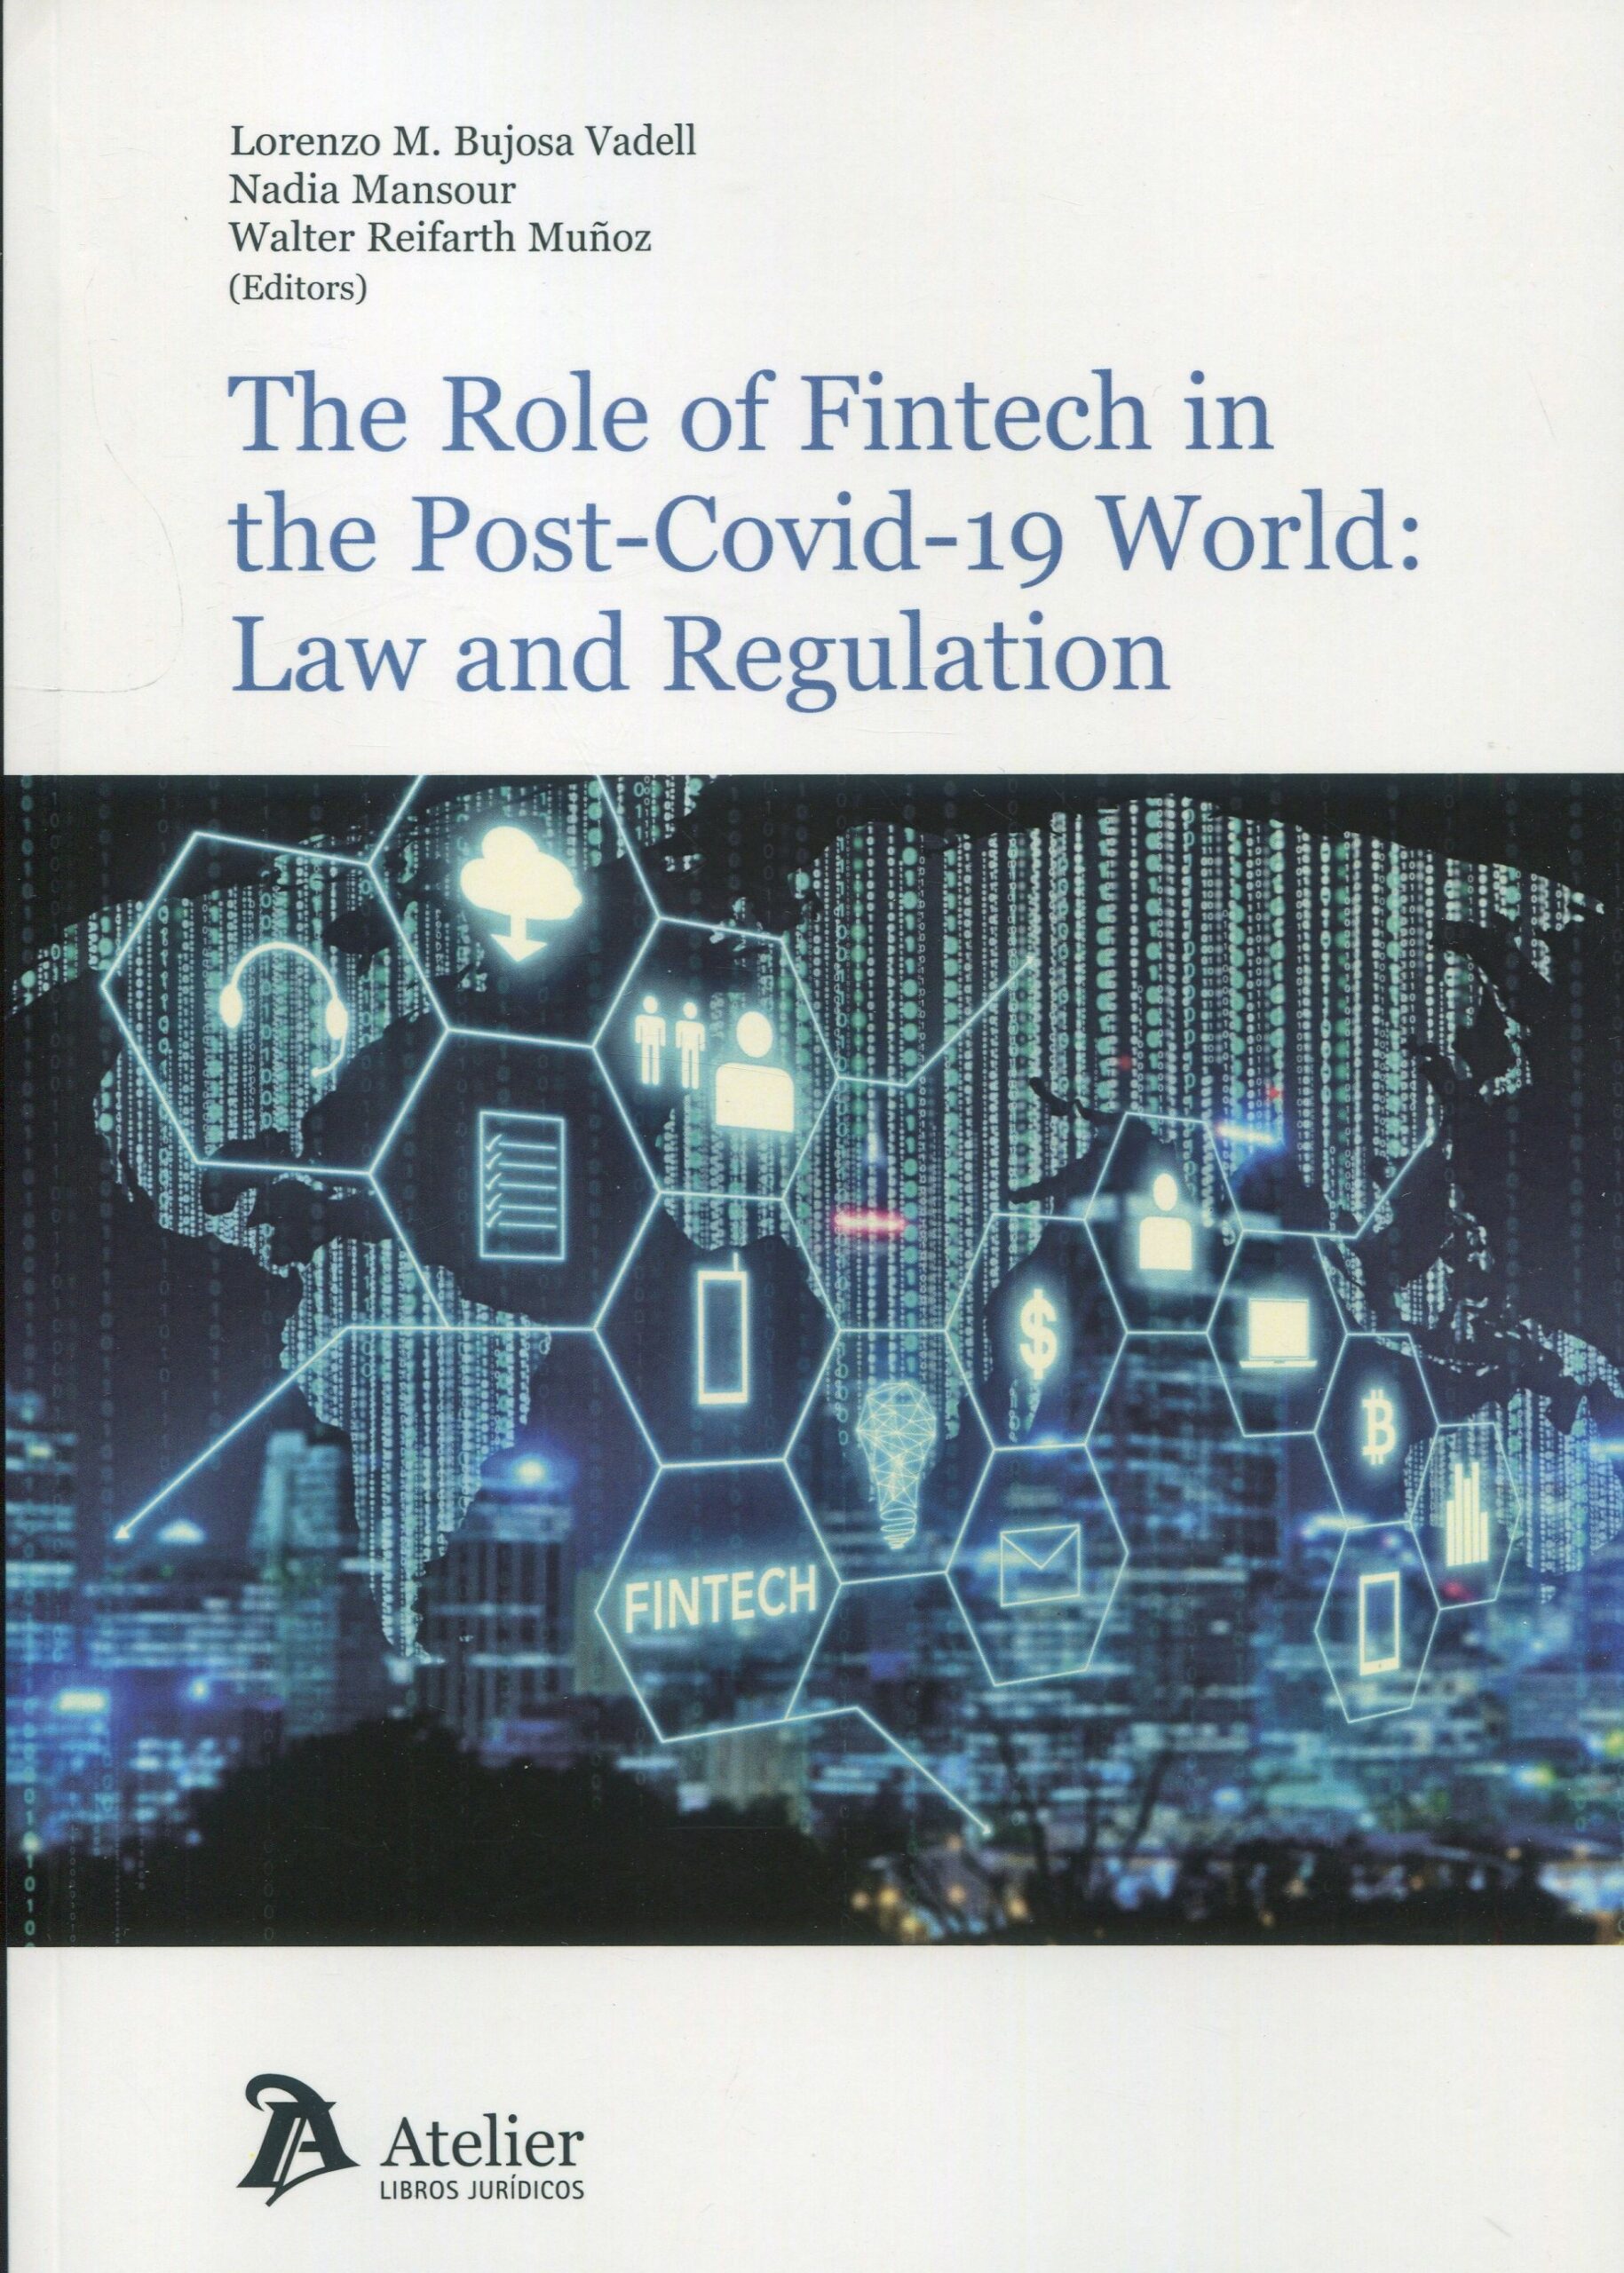 The role of Fintech in the Post-Covid-19 world